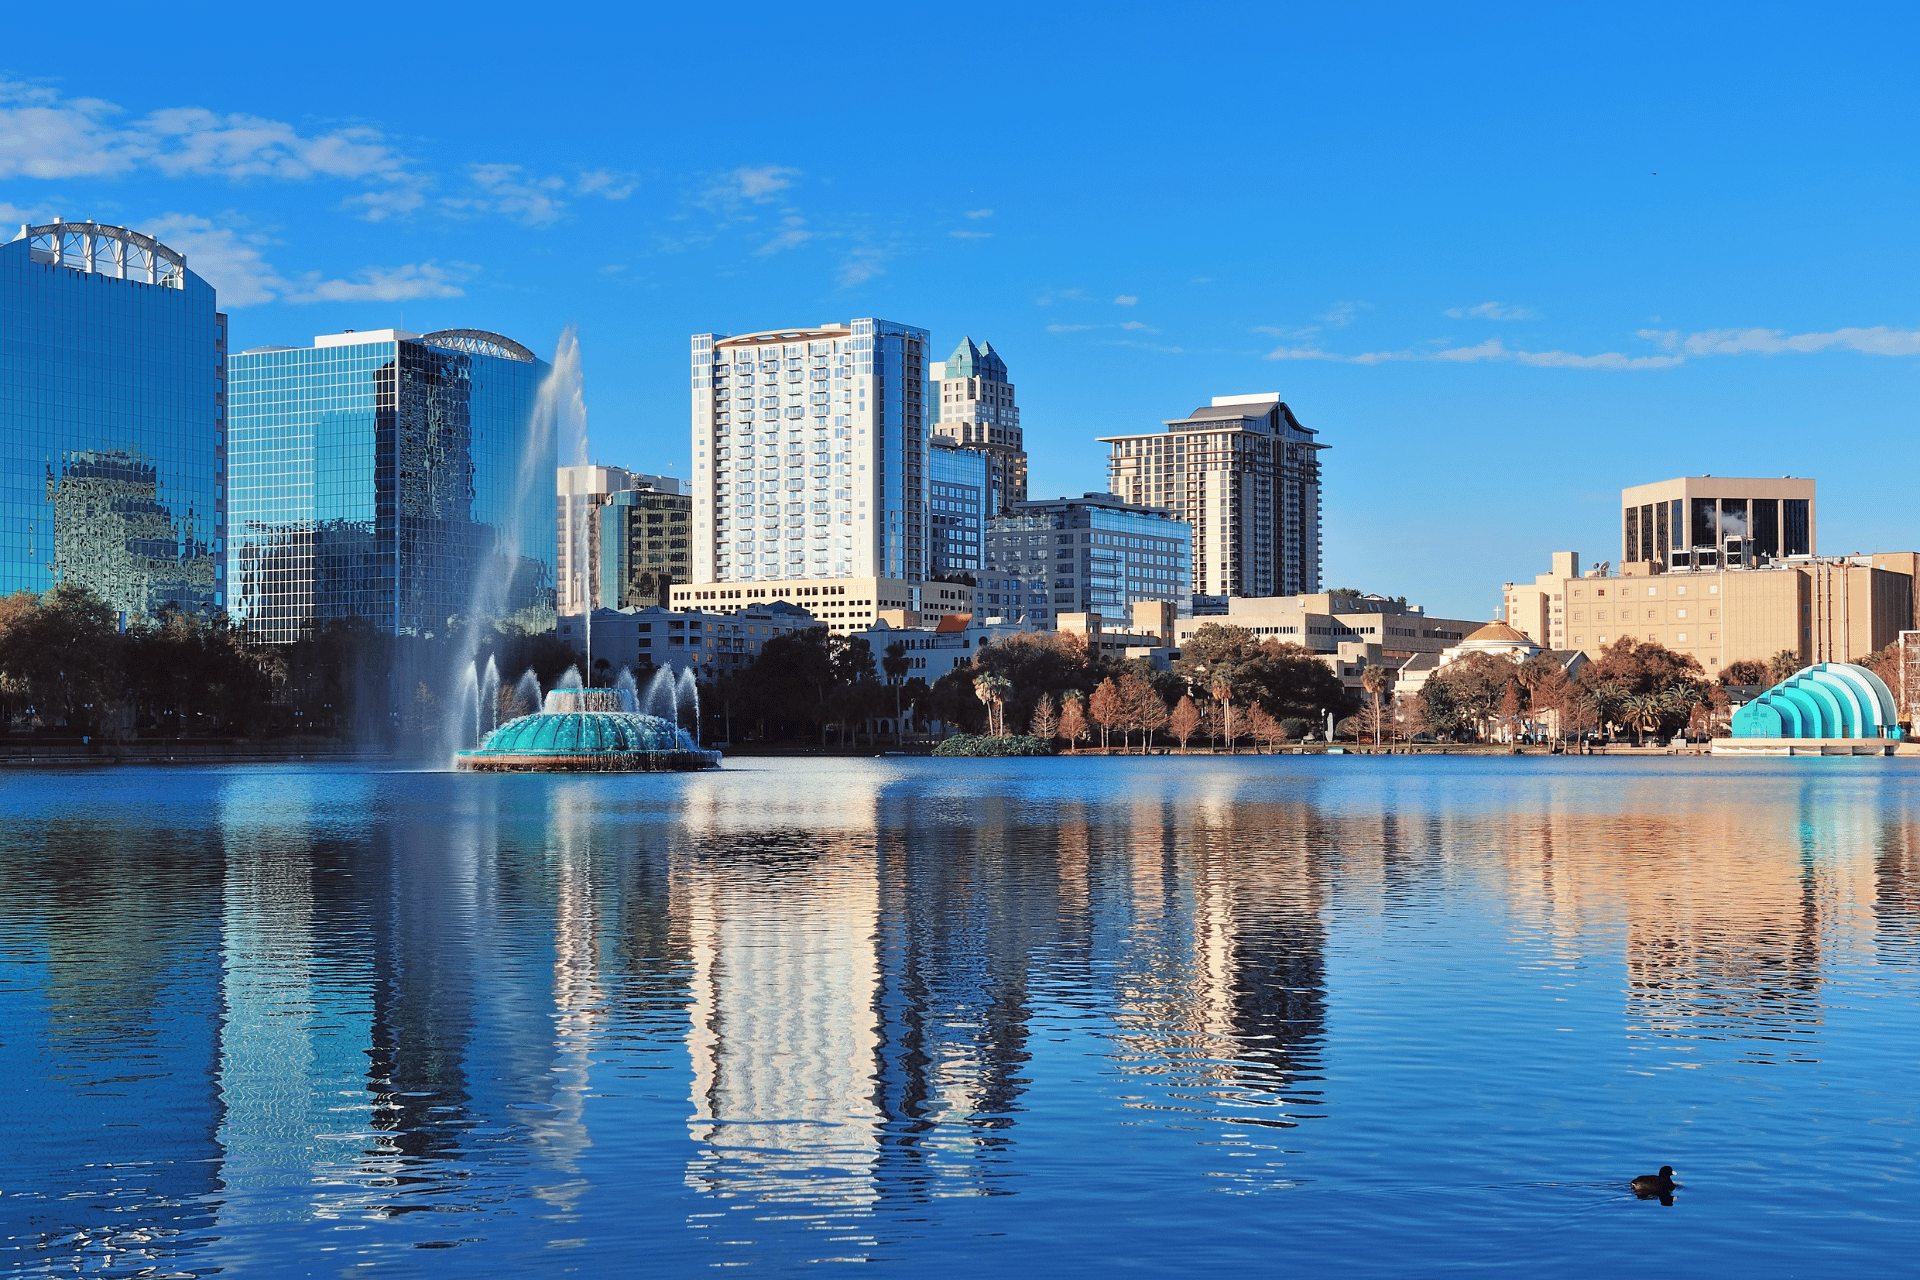 Donwtown Orlando, with the lake. Orlando, Florida by traveler1116 from Getty Images